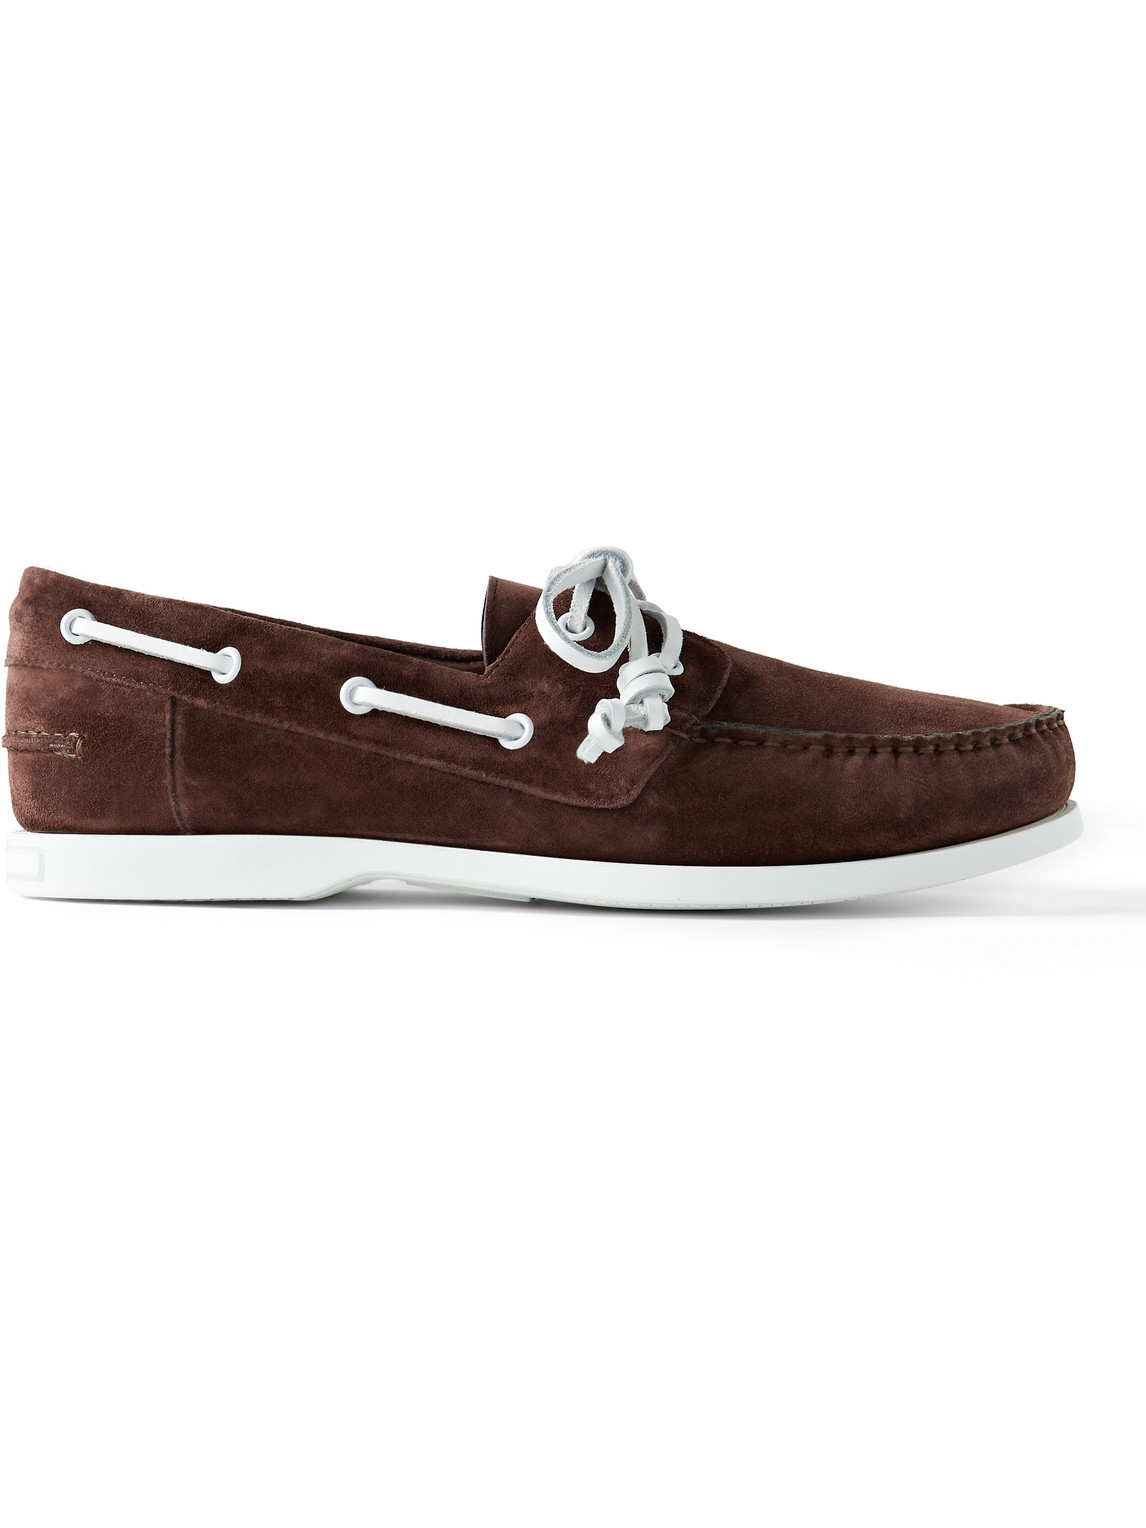 Sidmouth Suede Boat Shoes